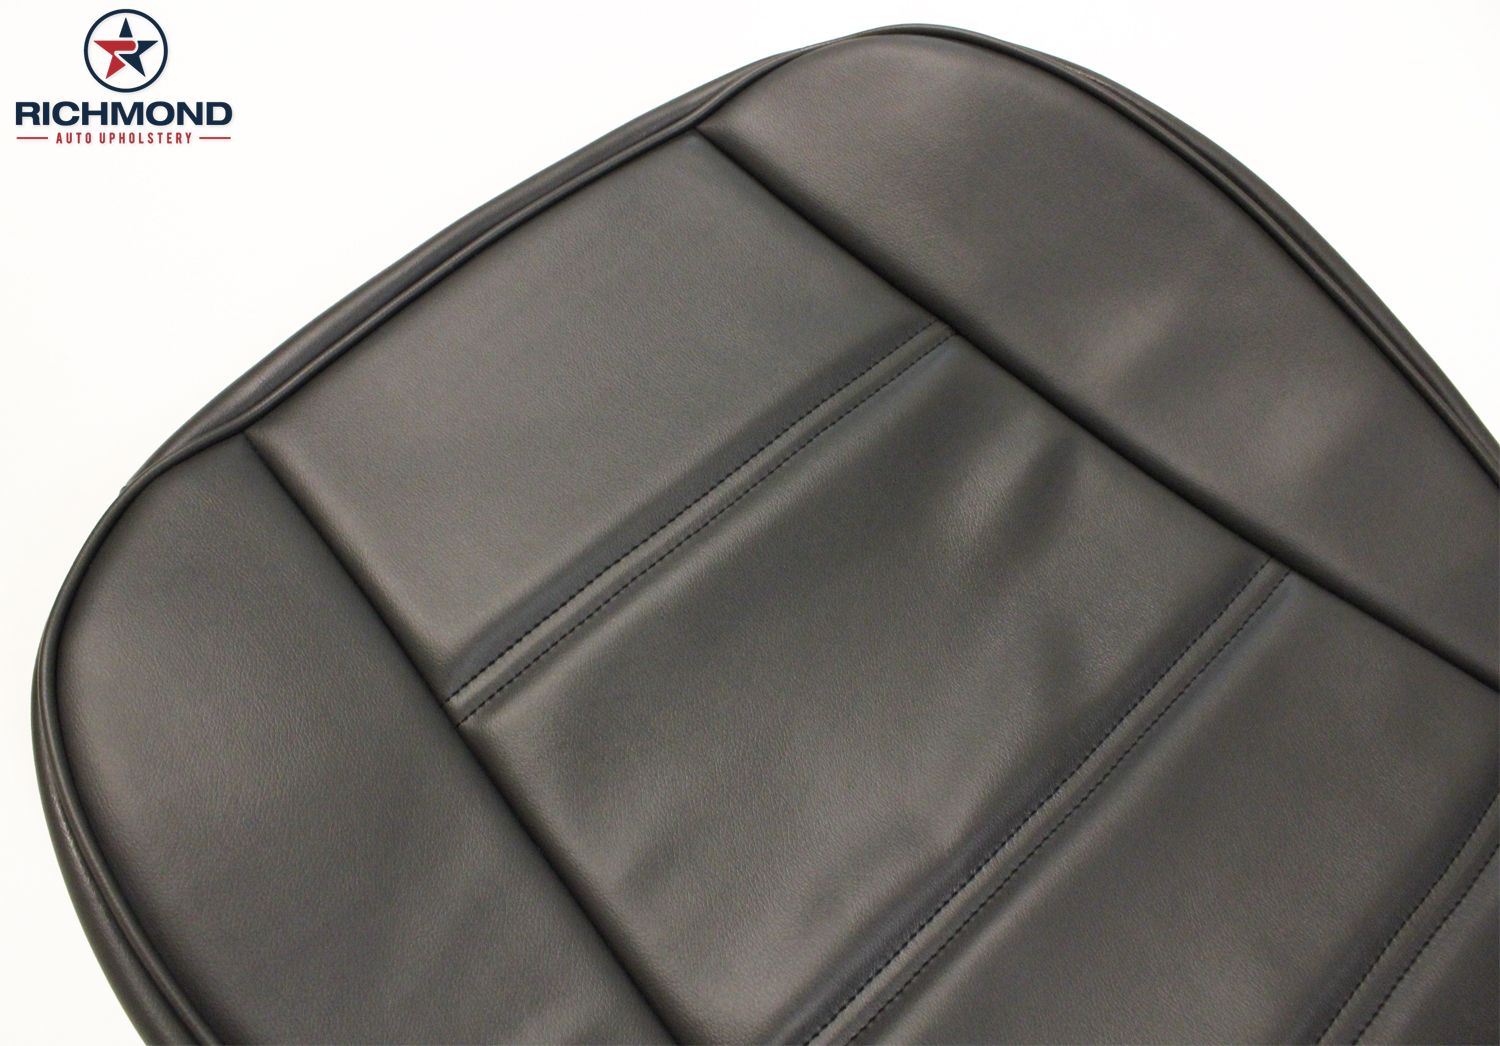 2002 Ford mustang replacement seats #8